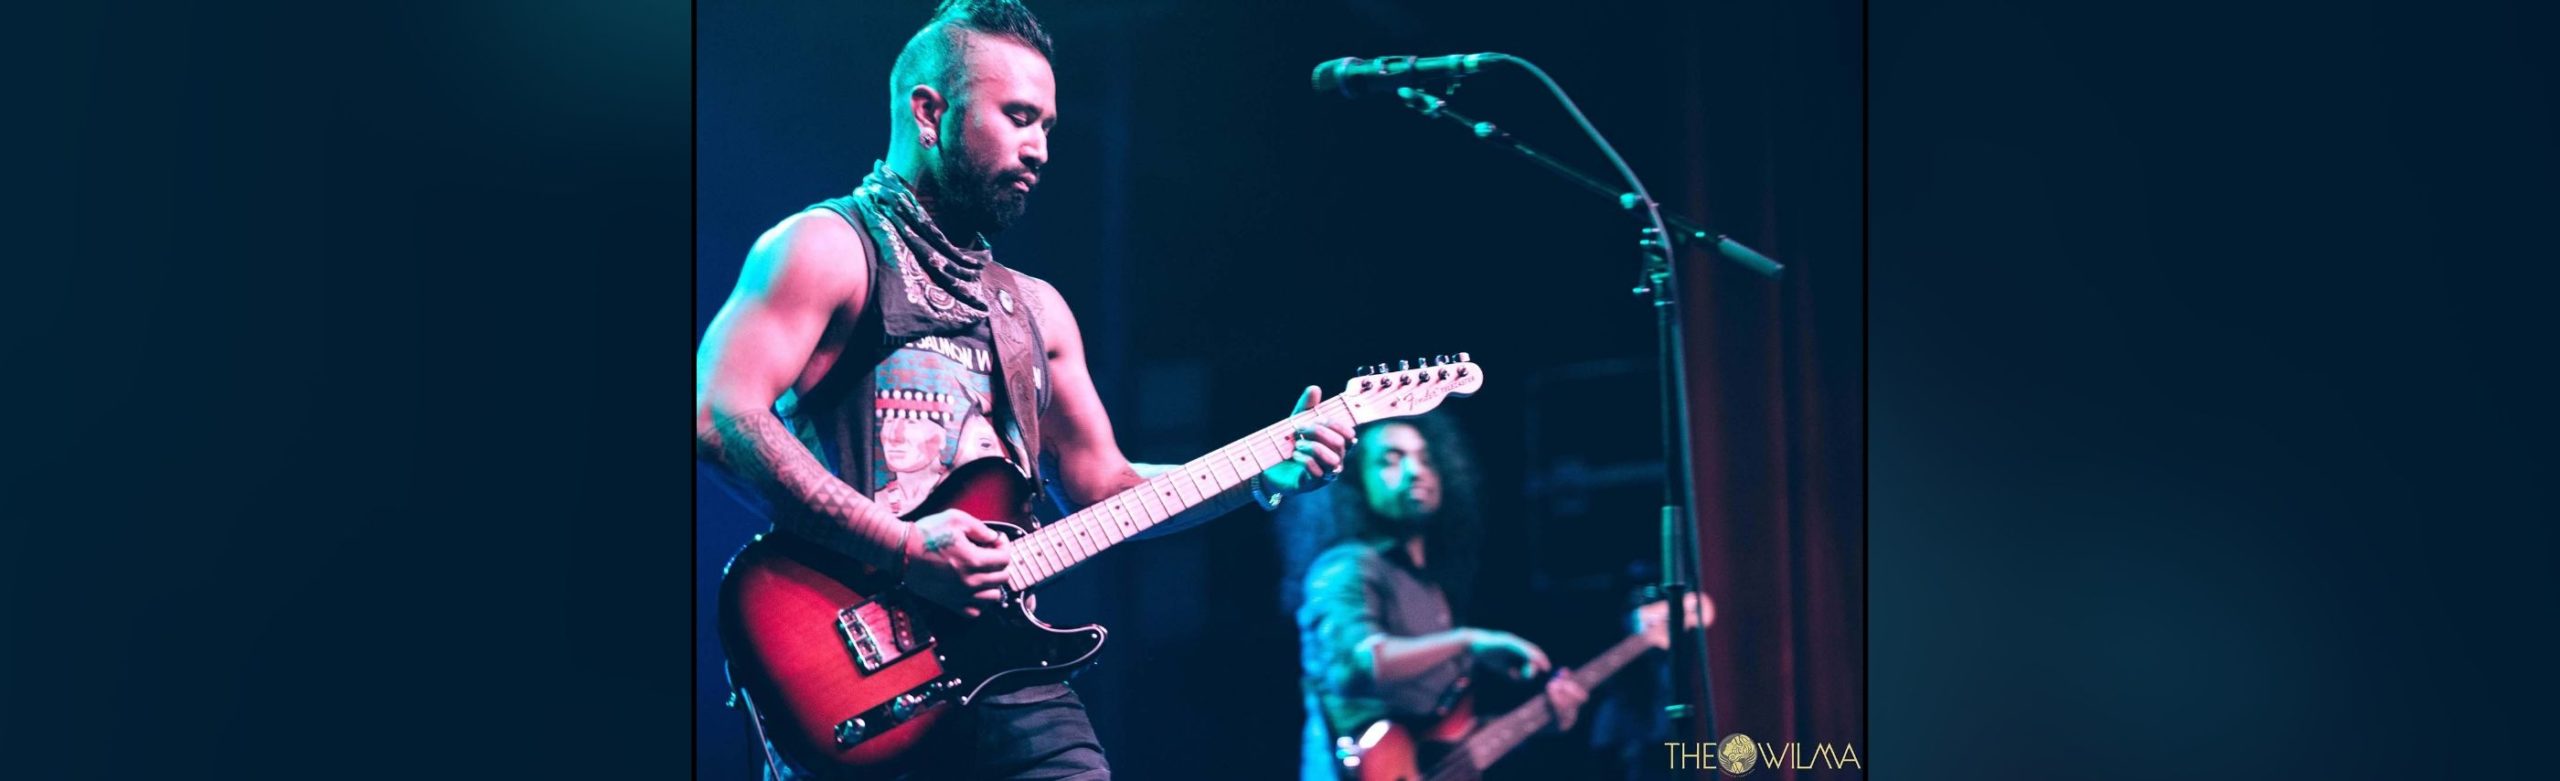 Event Info: Nahko and Medicine for the People 2019 Image